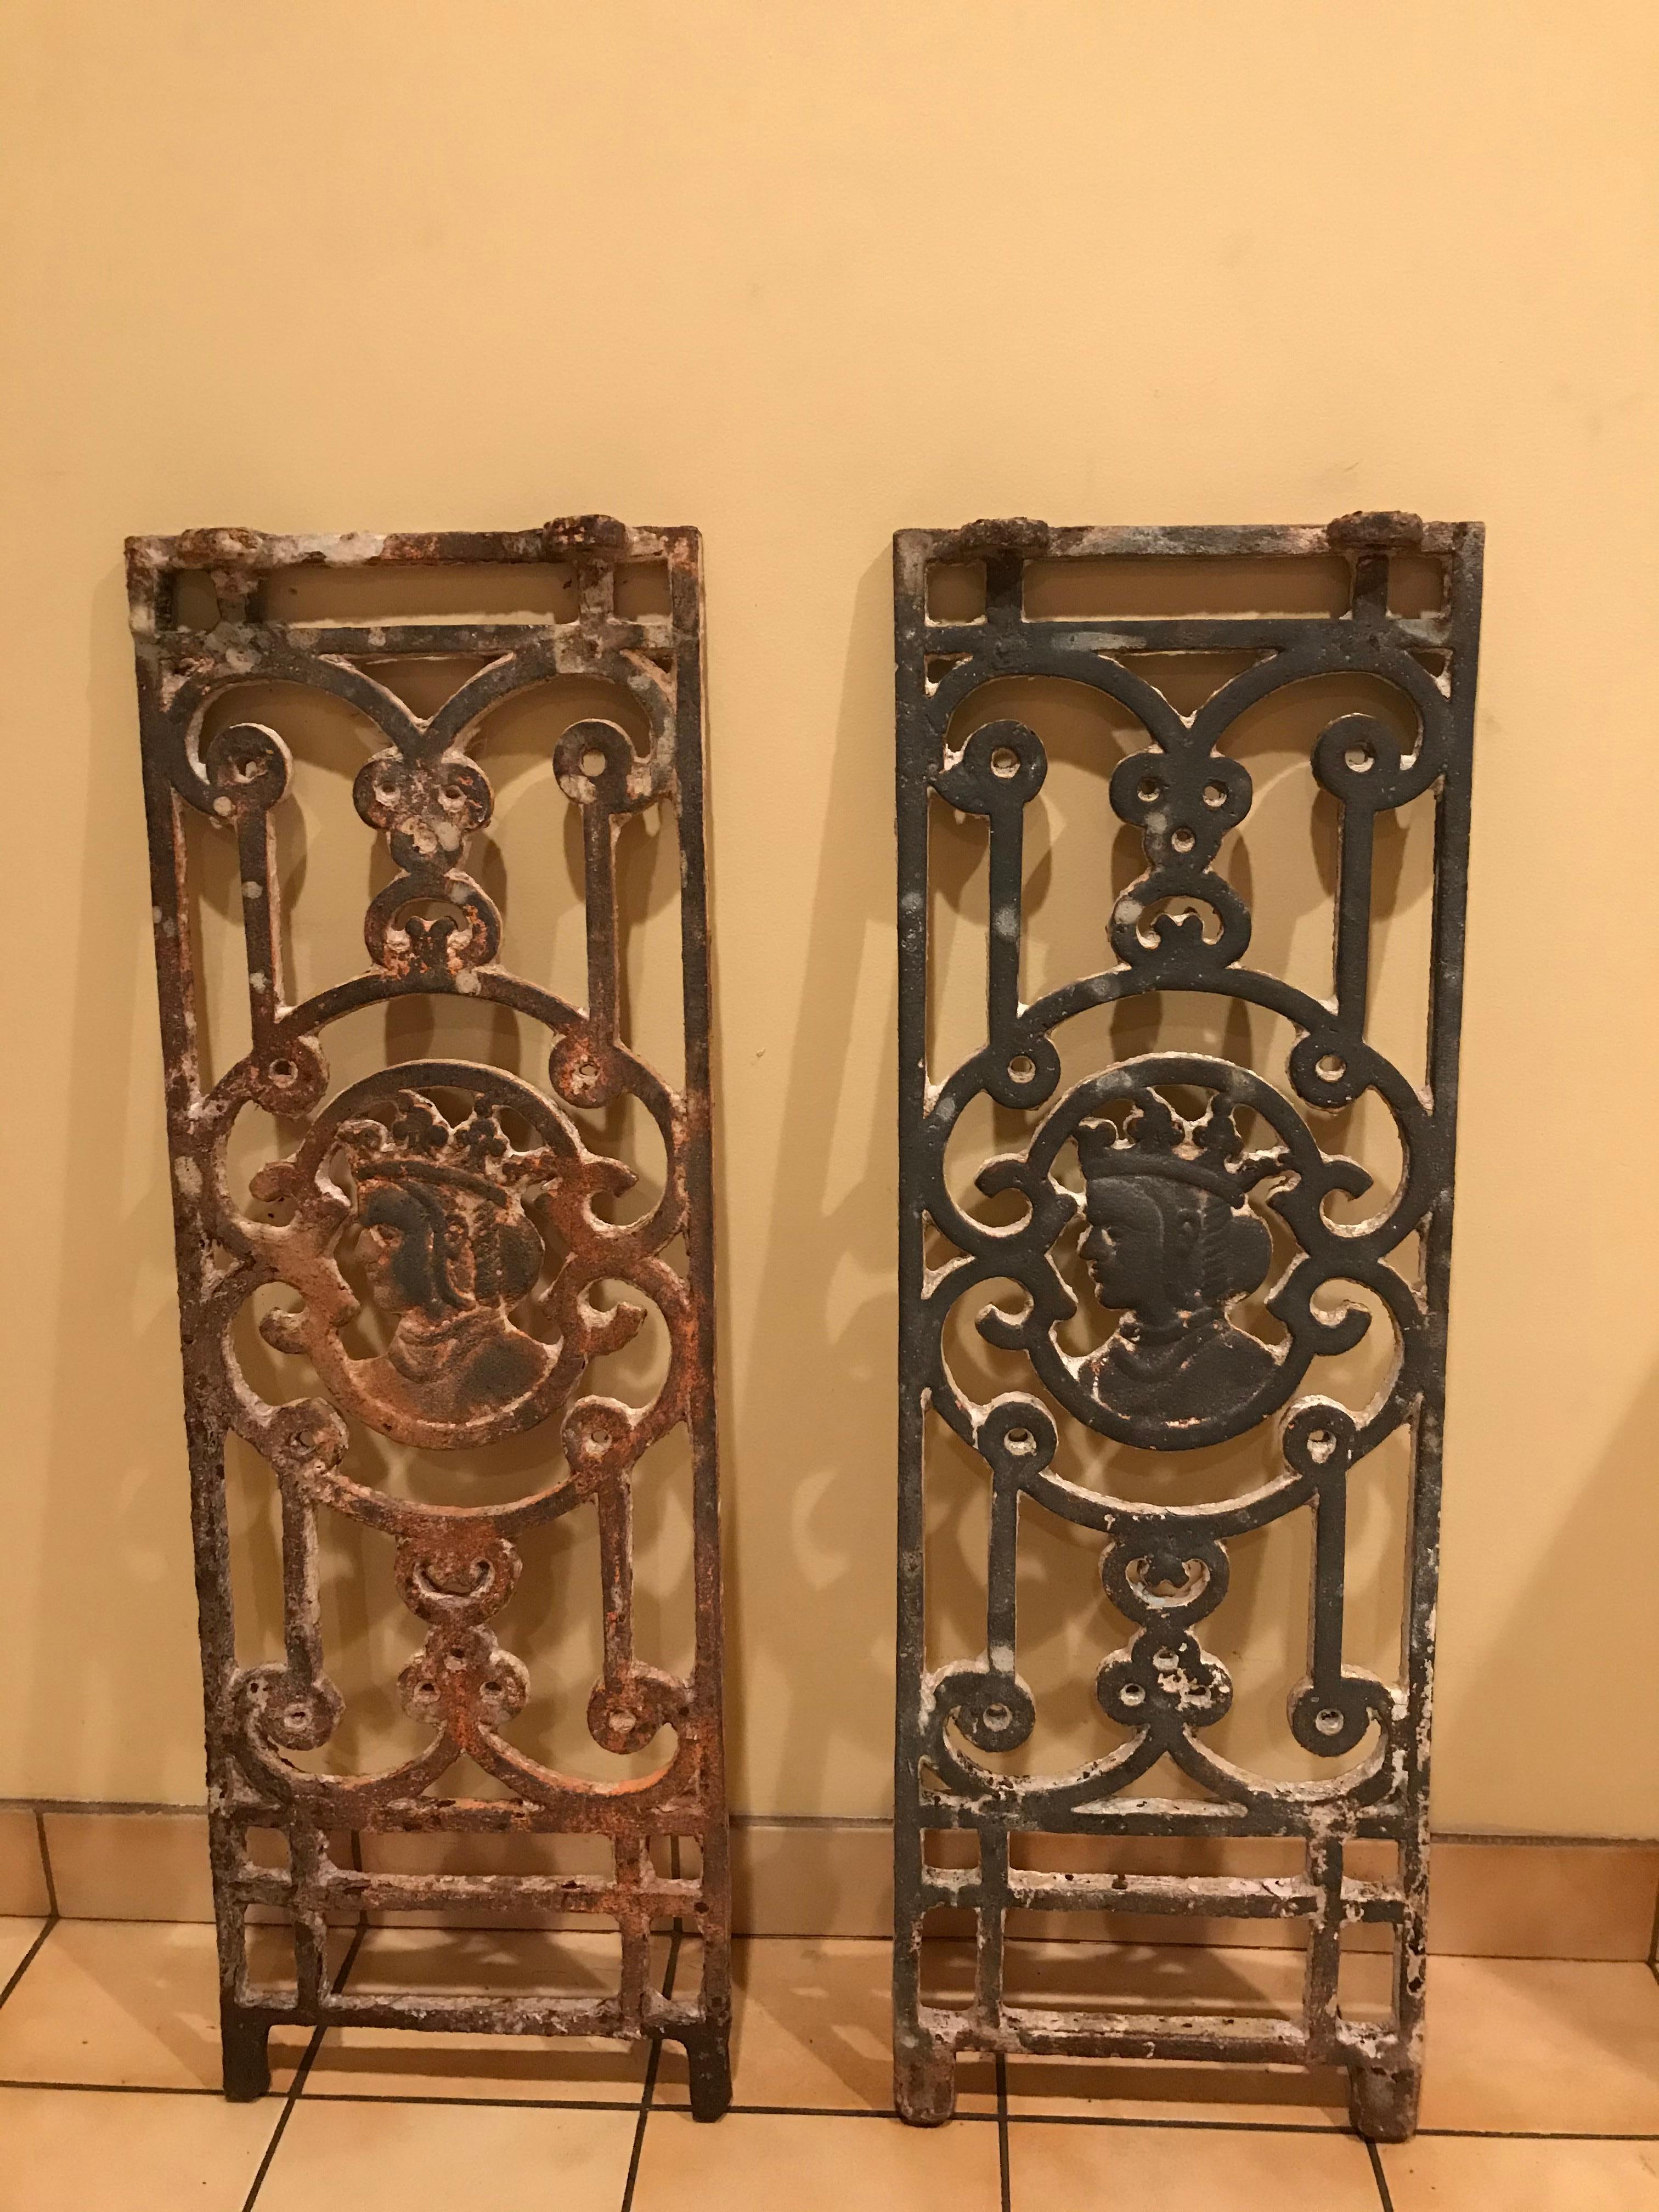 Rare salvaged young Queen Victoria Coronation Railings circa 1877 depicting crown and braid profile. These were balcony facade railings from an old British India Government Building torn down several years ago. They are rare to find in this